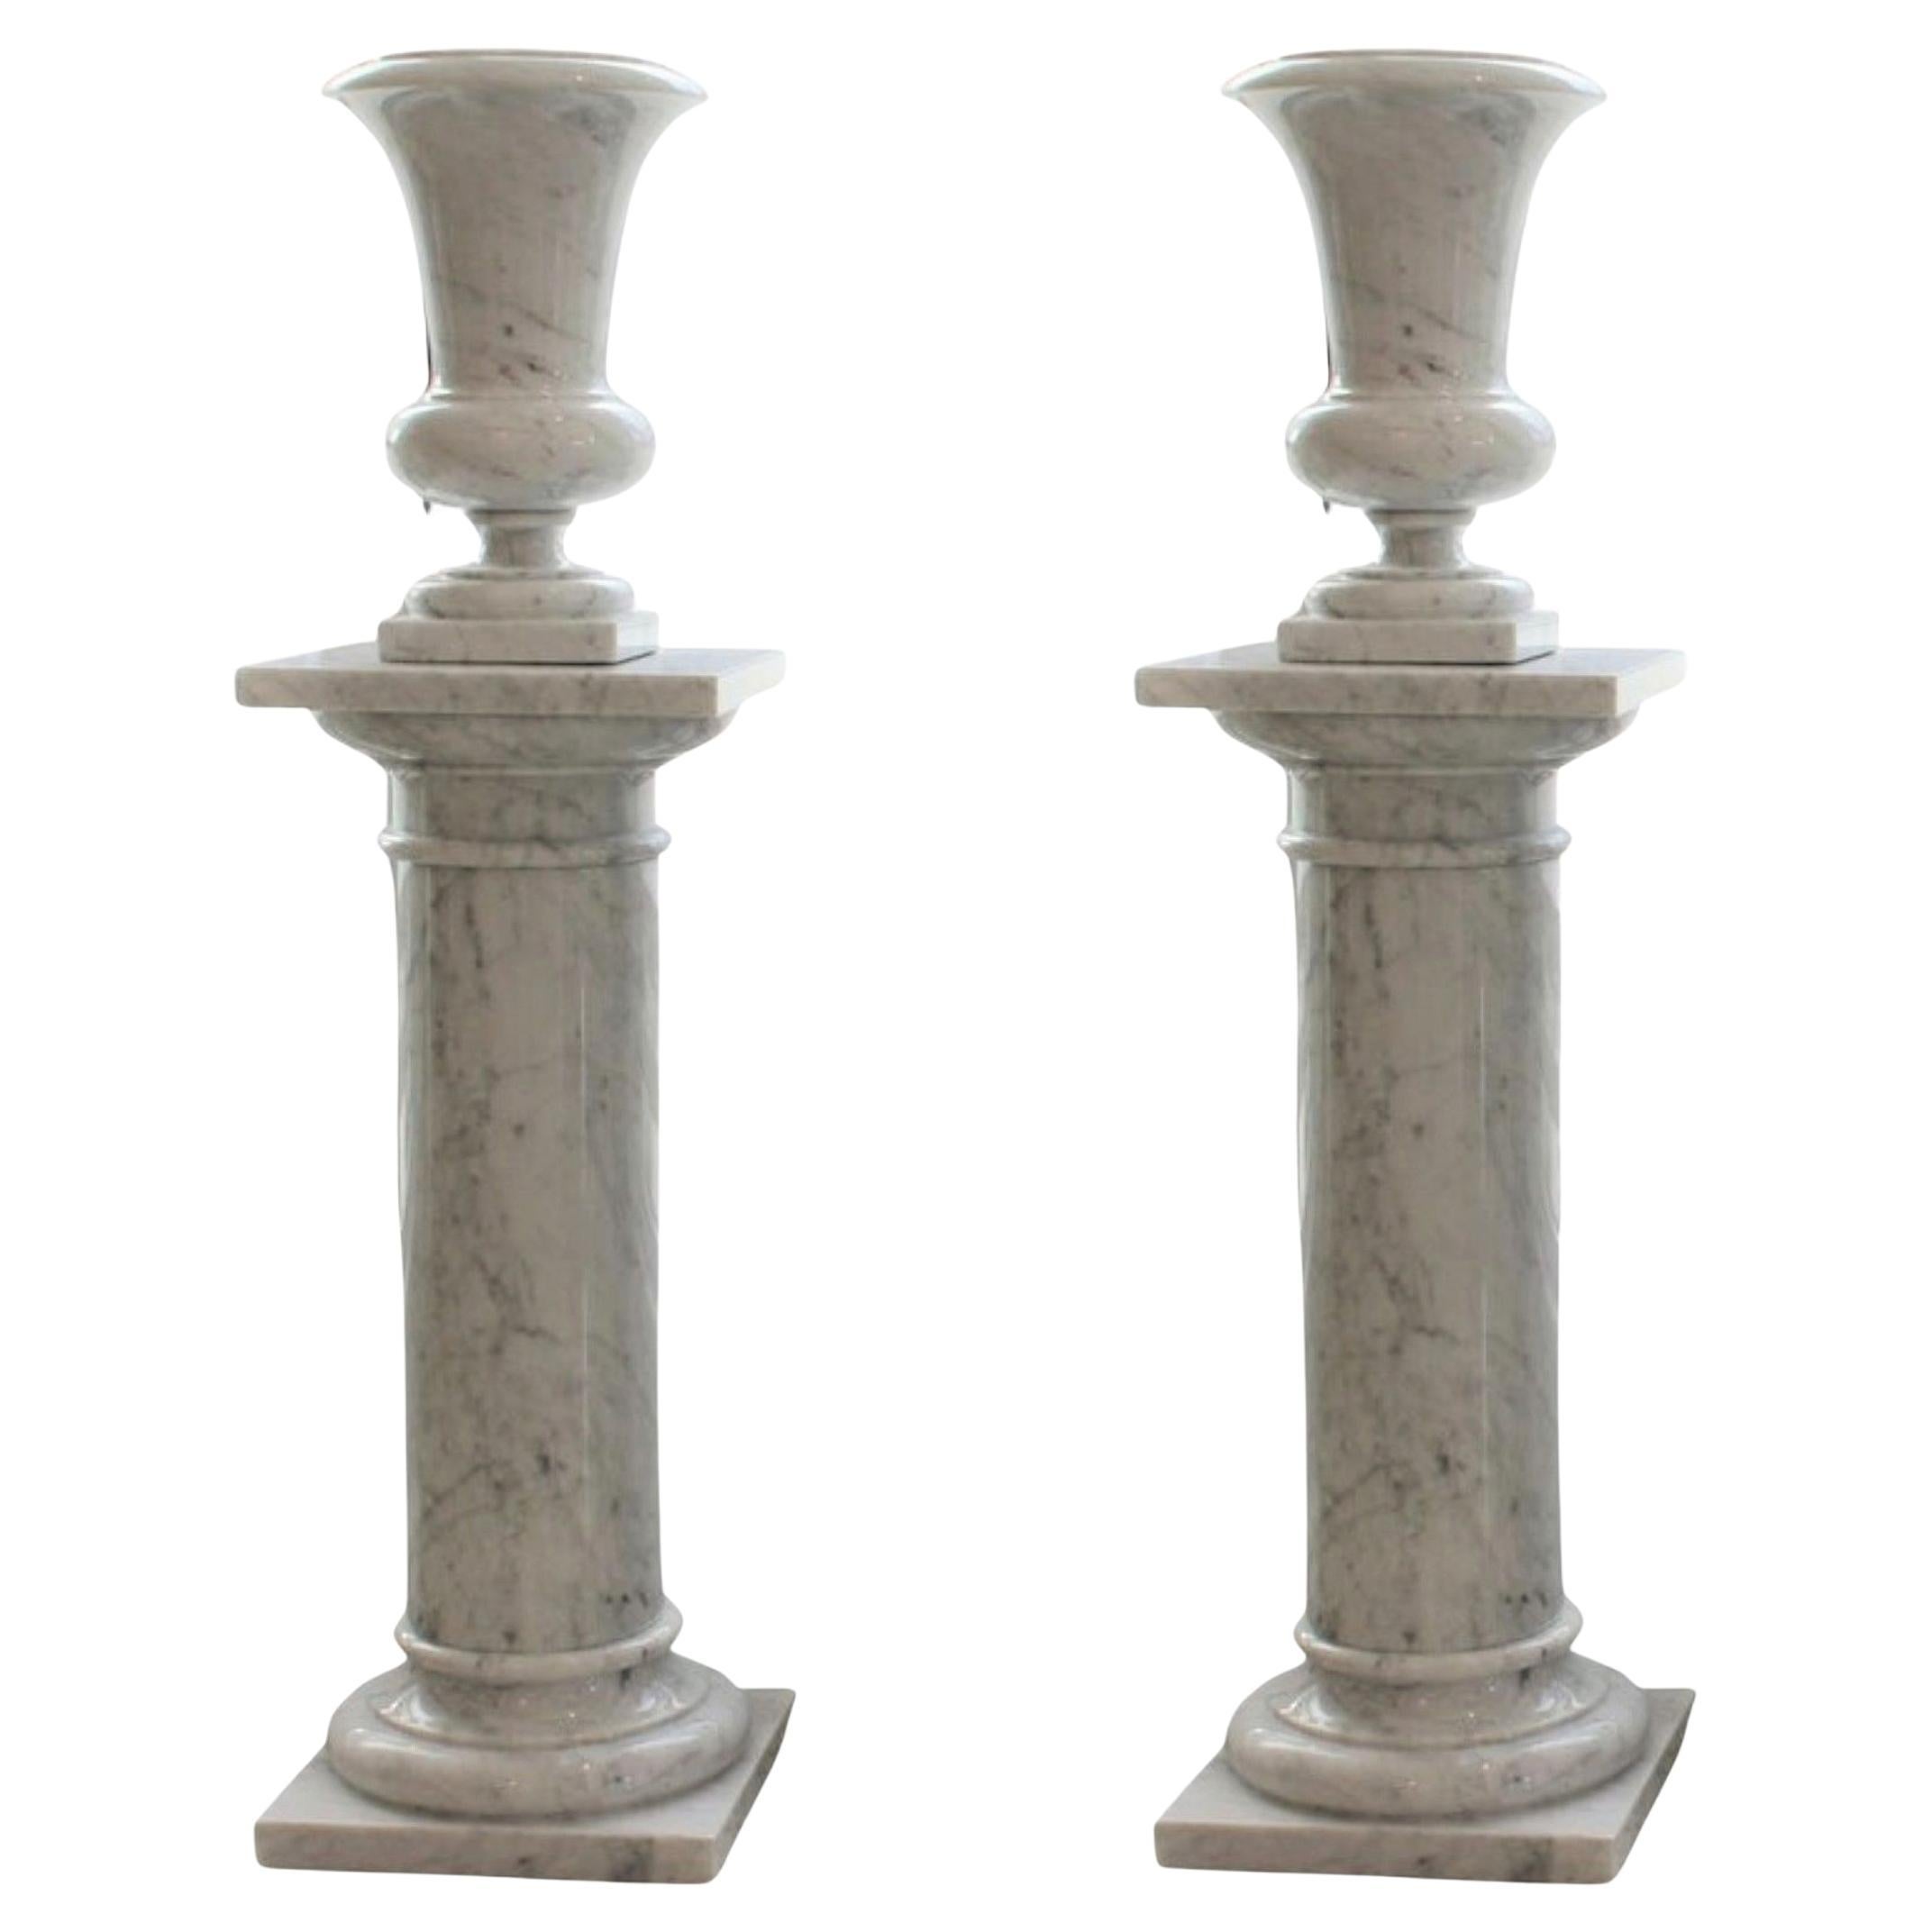 This stylish and chic pair of carrera marble urns on stand were acquired from a Palm Beach estate.  The pieces will make a statment with their form and use of materials.

Note: The urns are not affixed to the bases.

Note: The urns measure